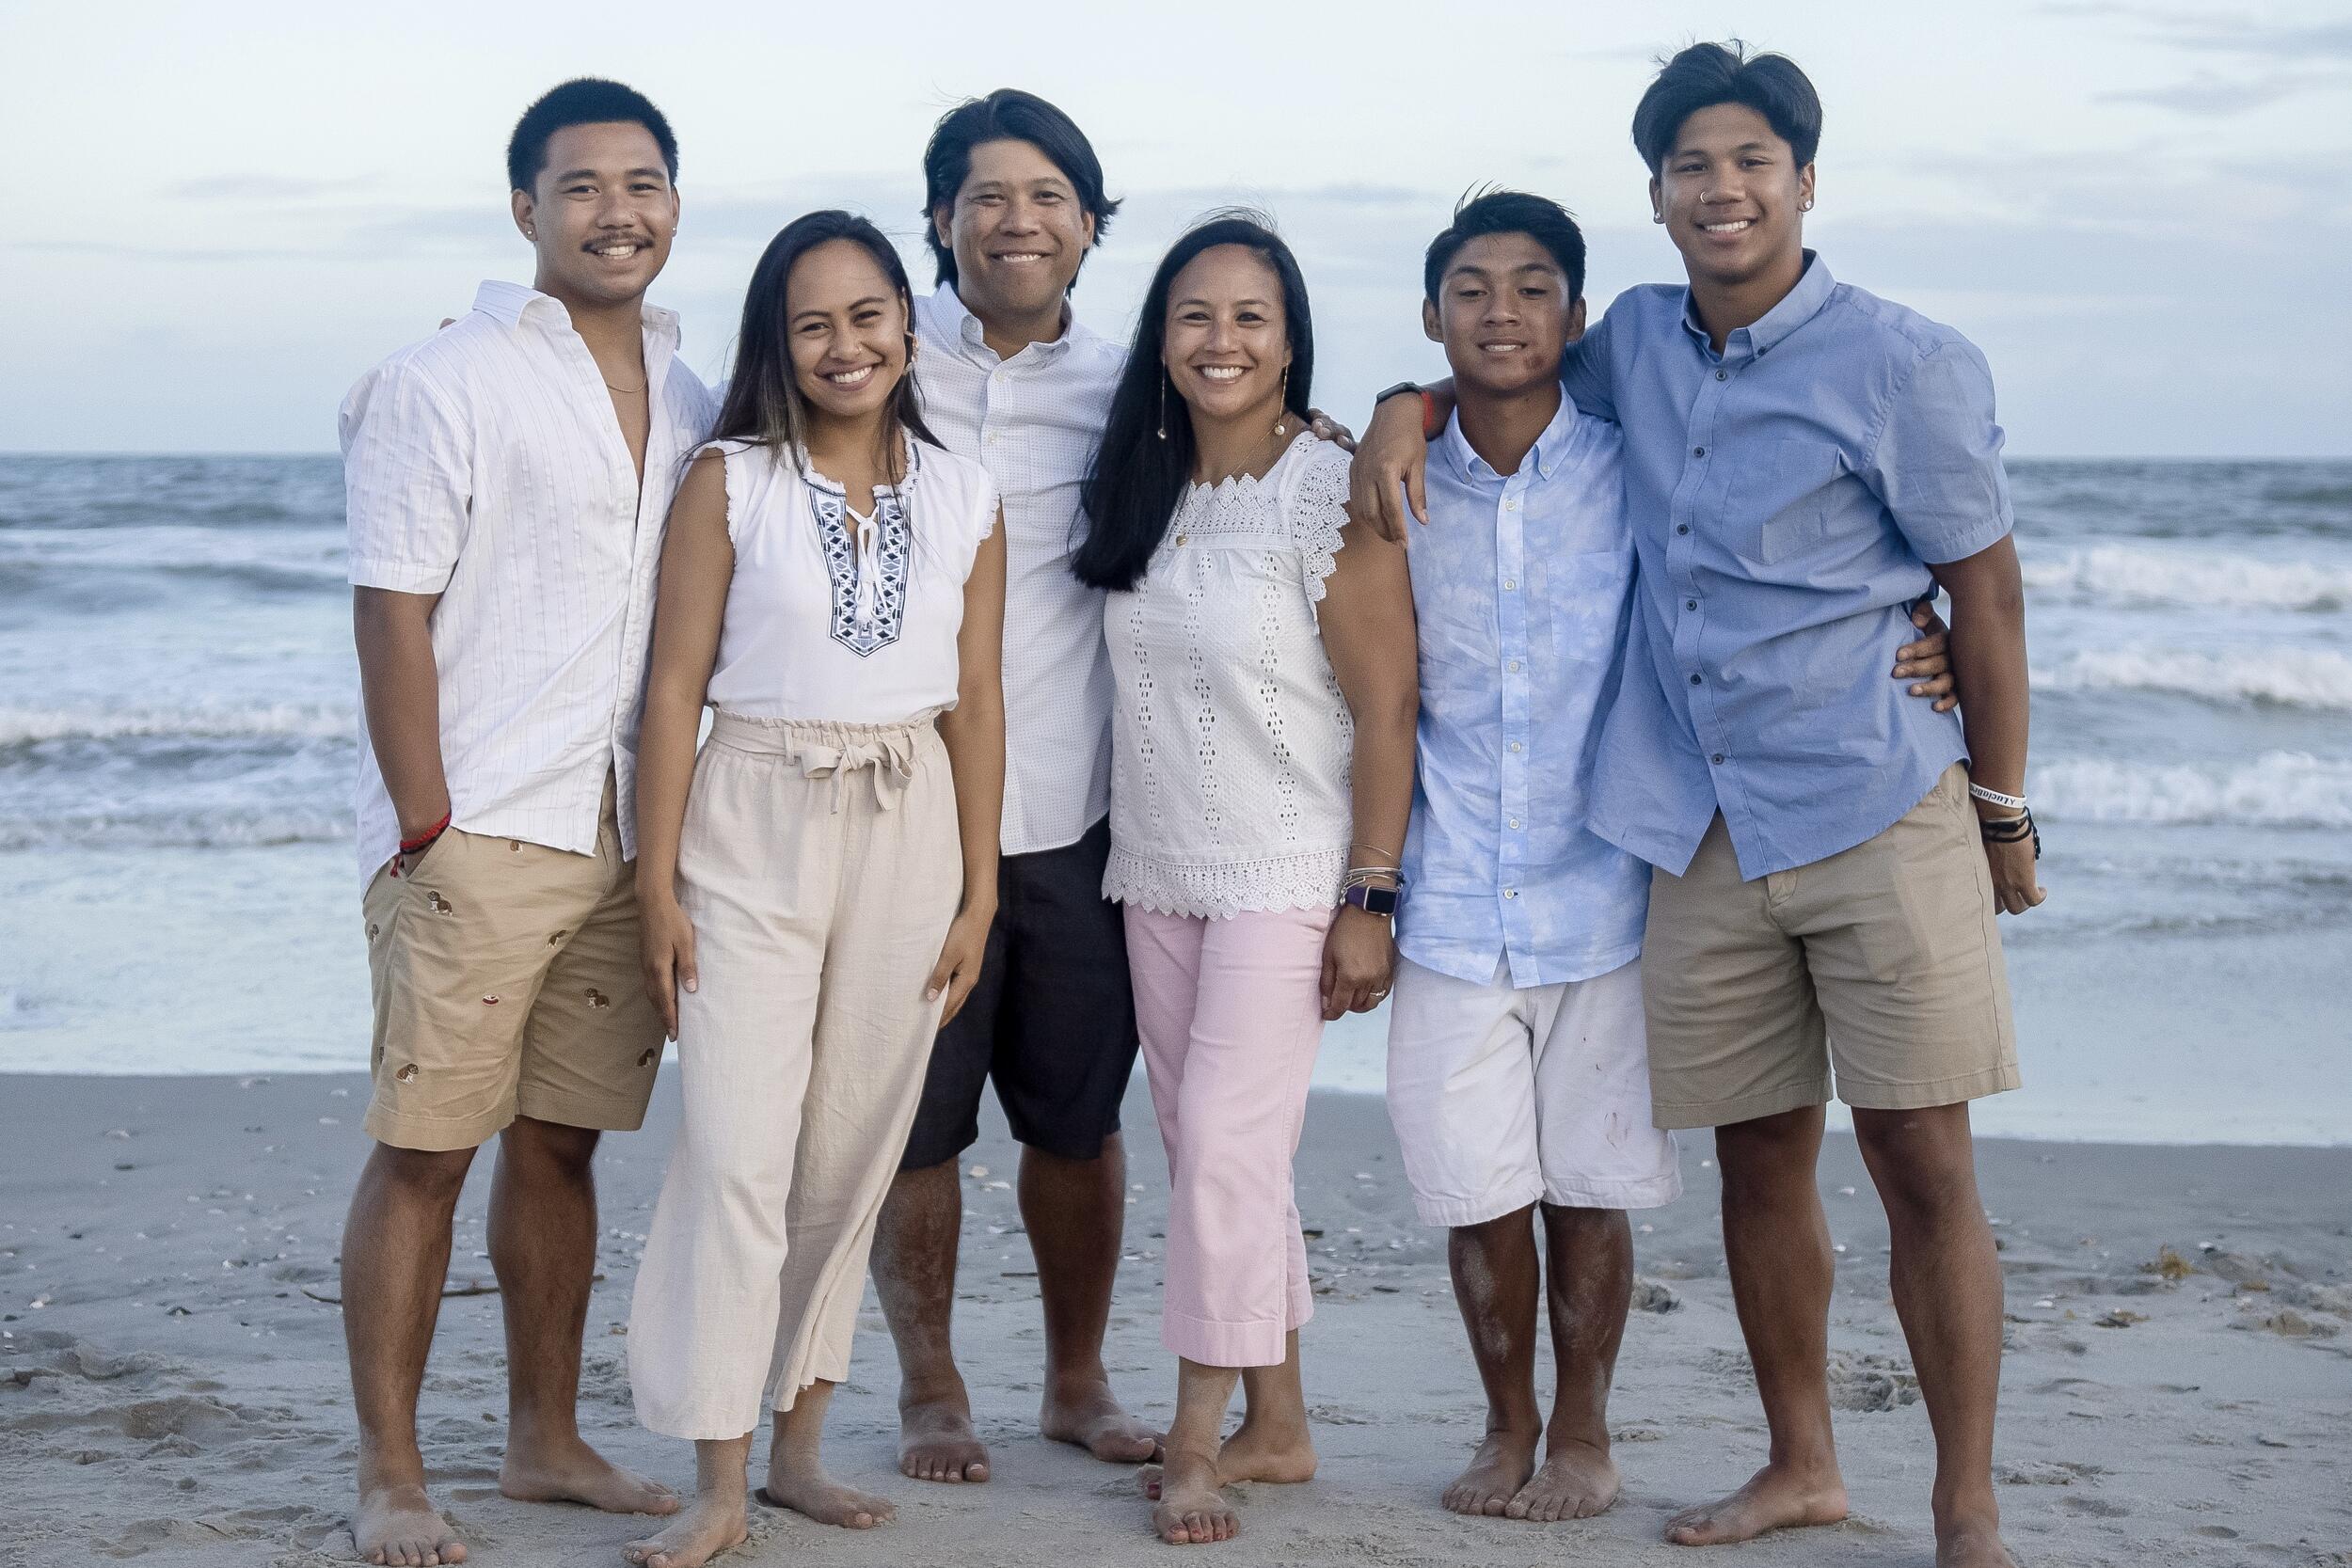 A group photo of six people standing on a beach. 